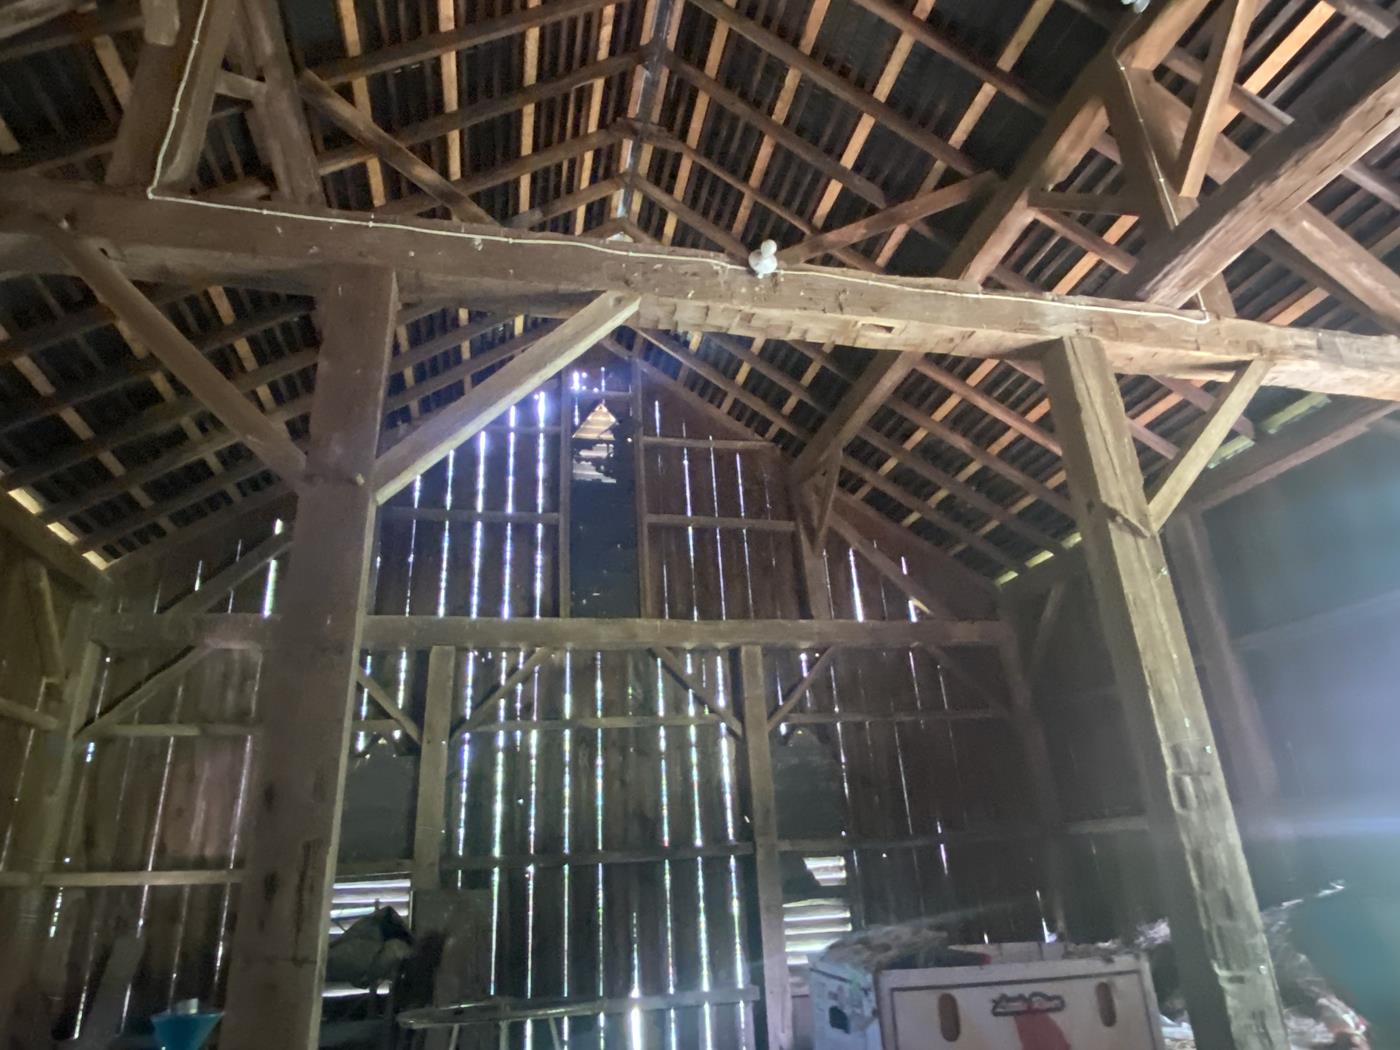 https://www.ohiovalleybarnsalvage.com/images/Unkefer Barn Frame Ohio Valley Salvage - Your Source For White Oak Hand-Hewn Timbers